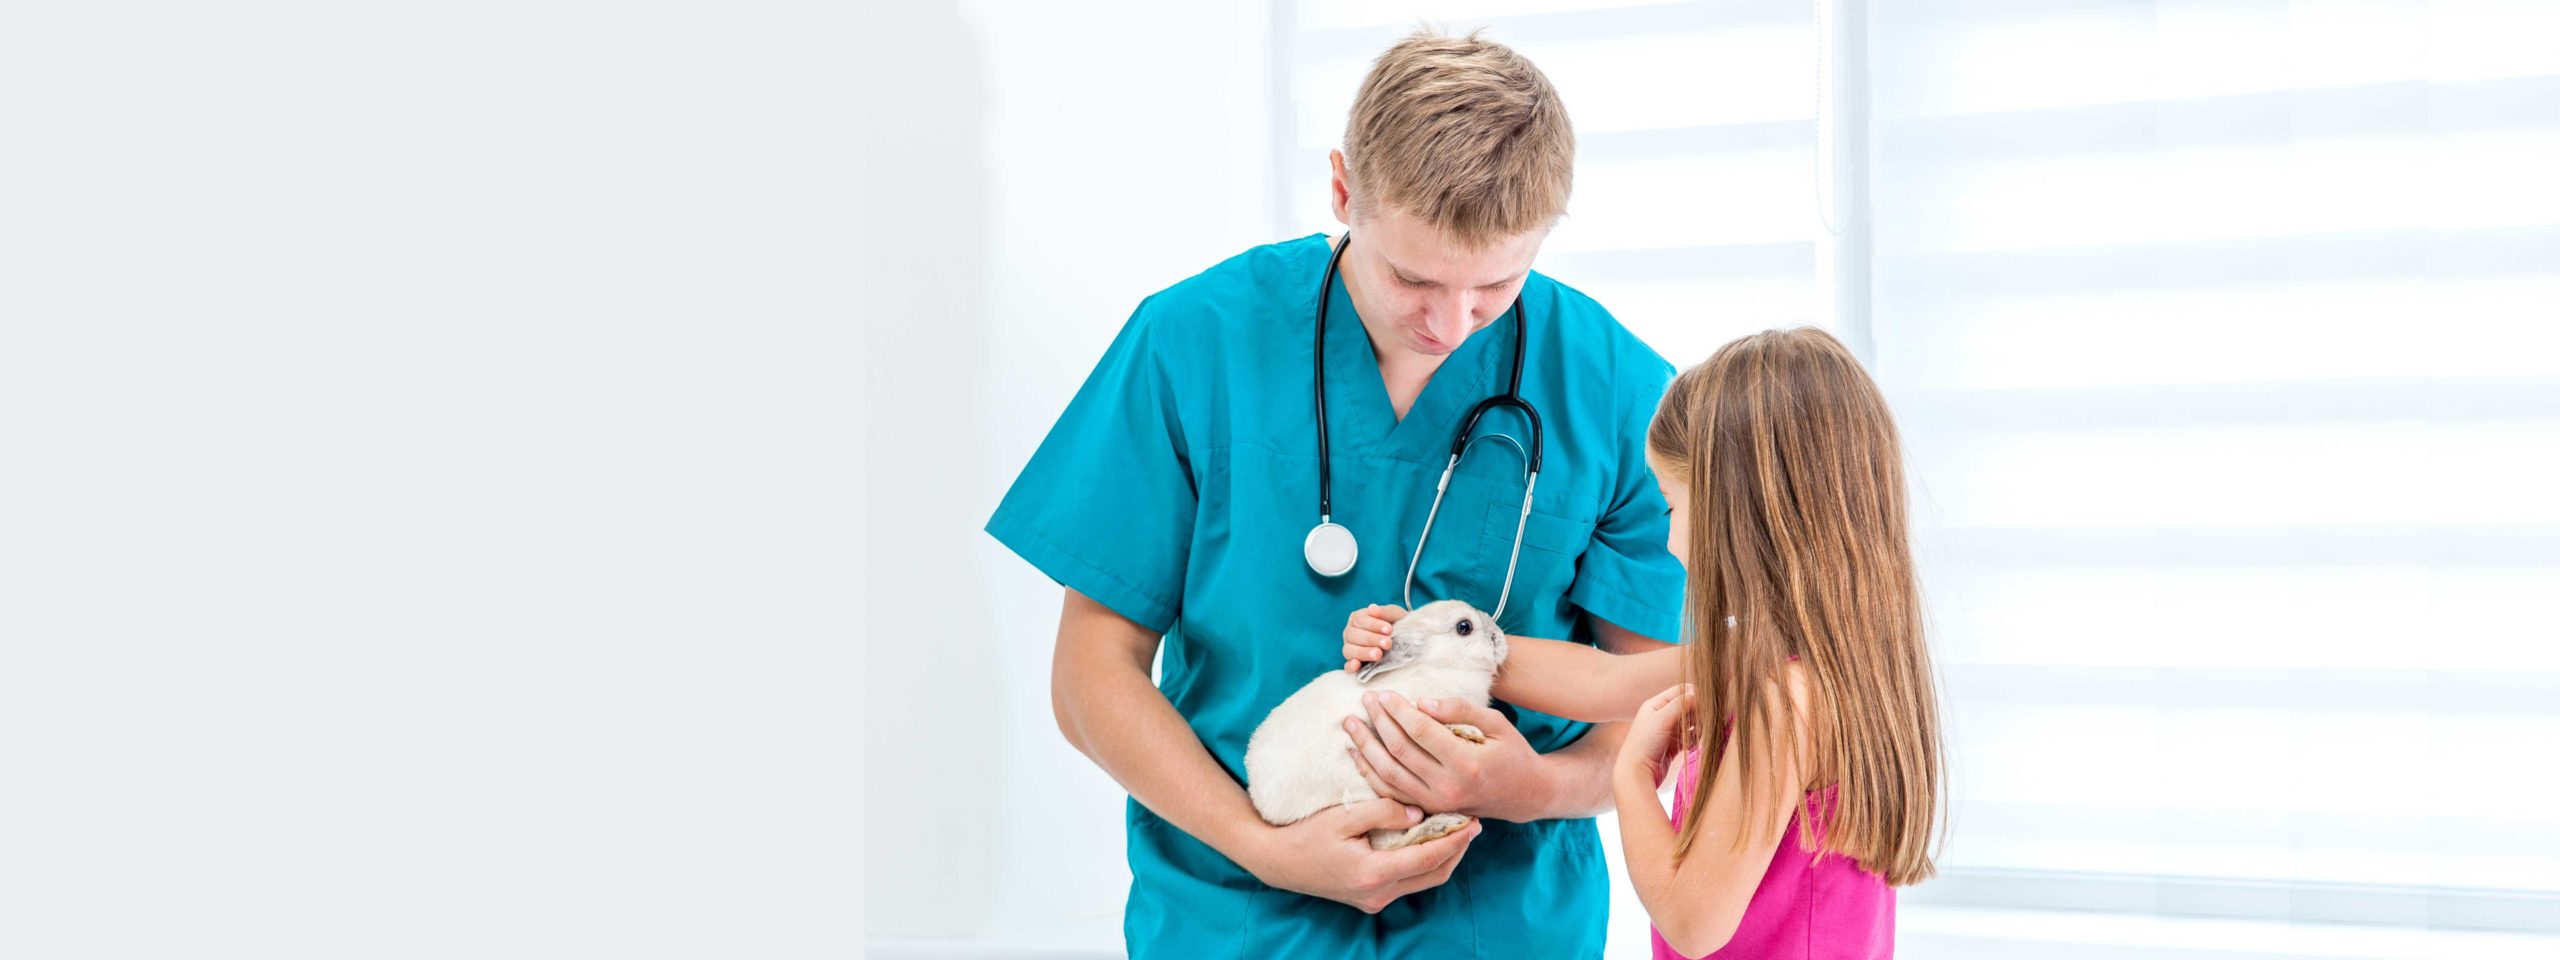 A doctor holds a rabbit and a child next to him